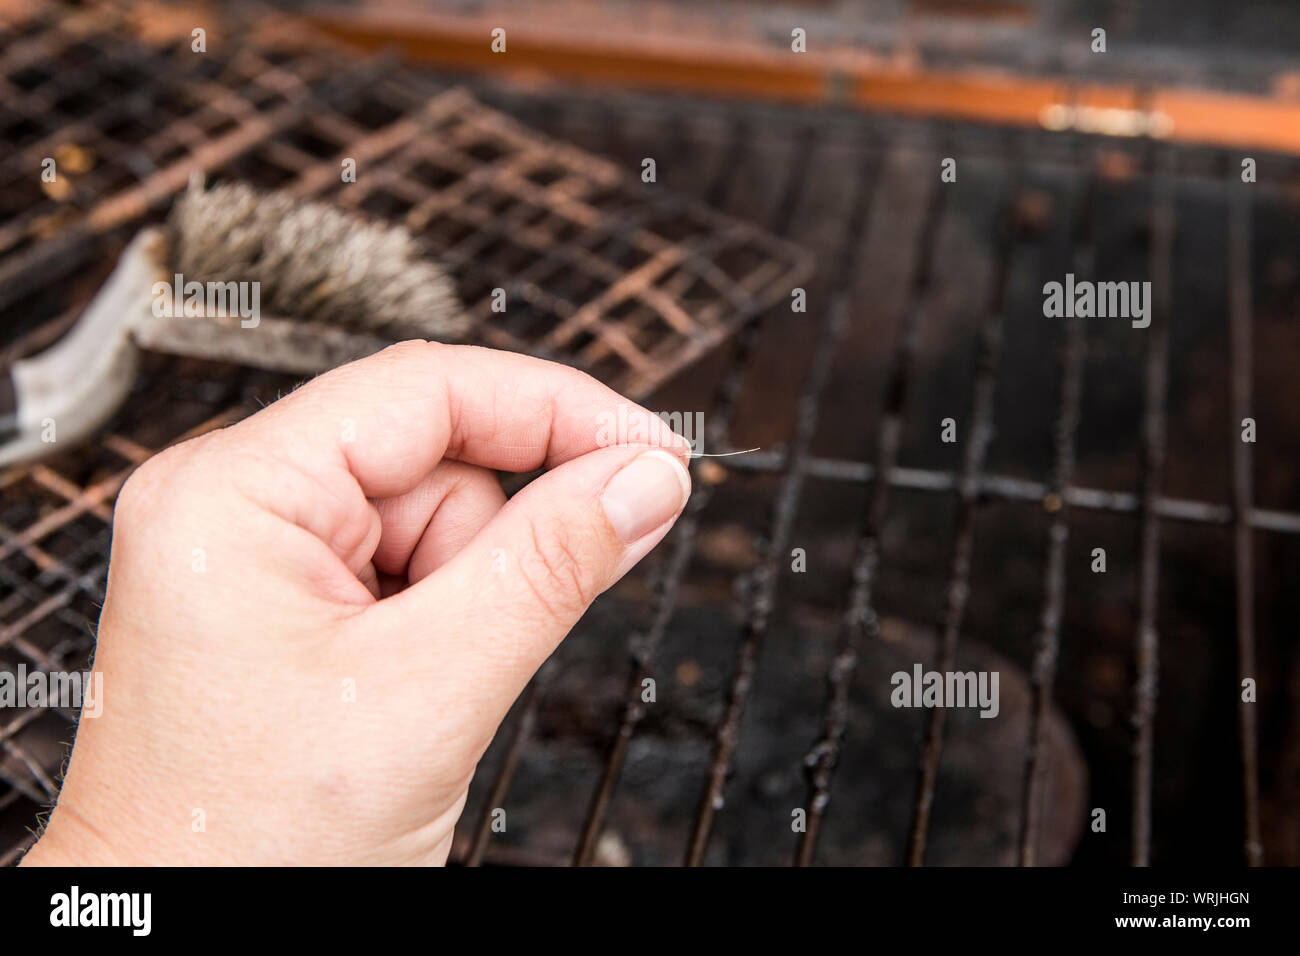 https://c8.alamy.com/comp/WRJHGN/person-hand-show-loose-bristle-form-bristol-grill-cleaning-brush-danger-when-it-sticks-to-meat-and-person-accidentally-swallows-it-digestion-damage-WRJHGN.jpg